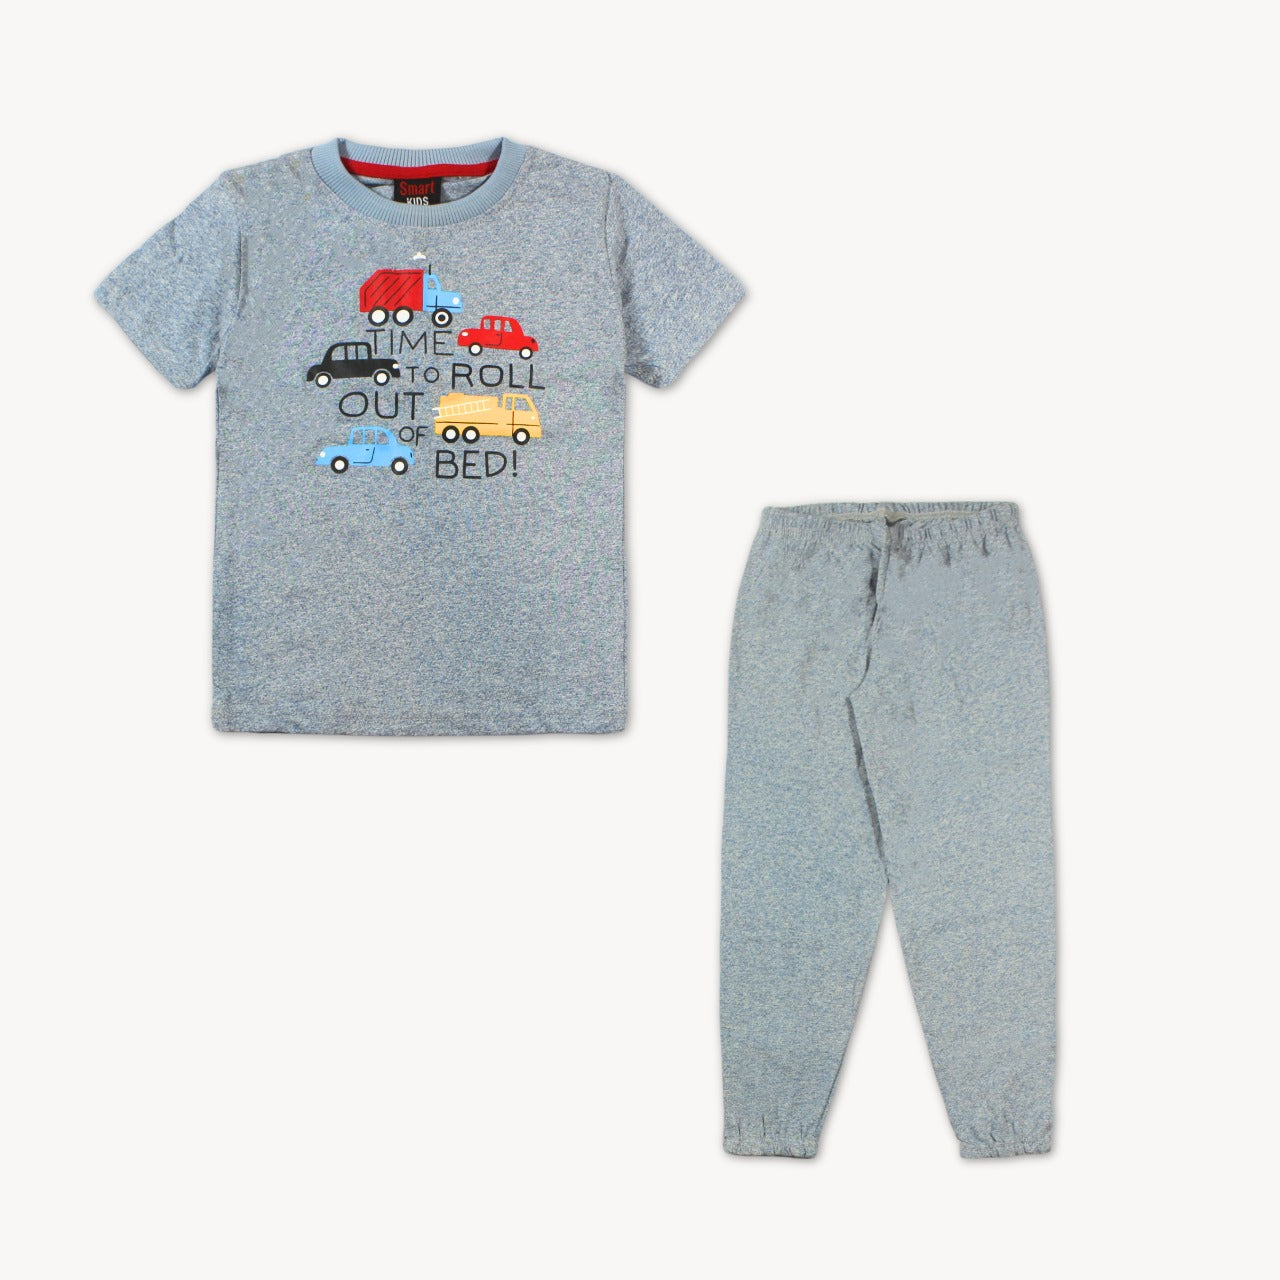 Sky Blue Time To Roll Out Summer Pajama Shirt Set